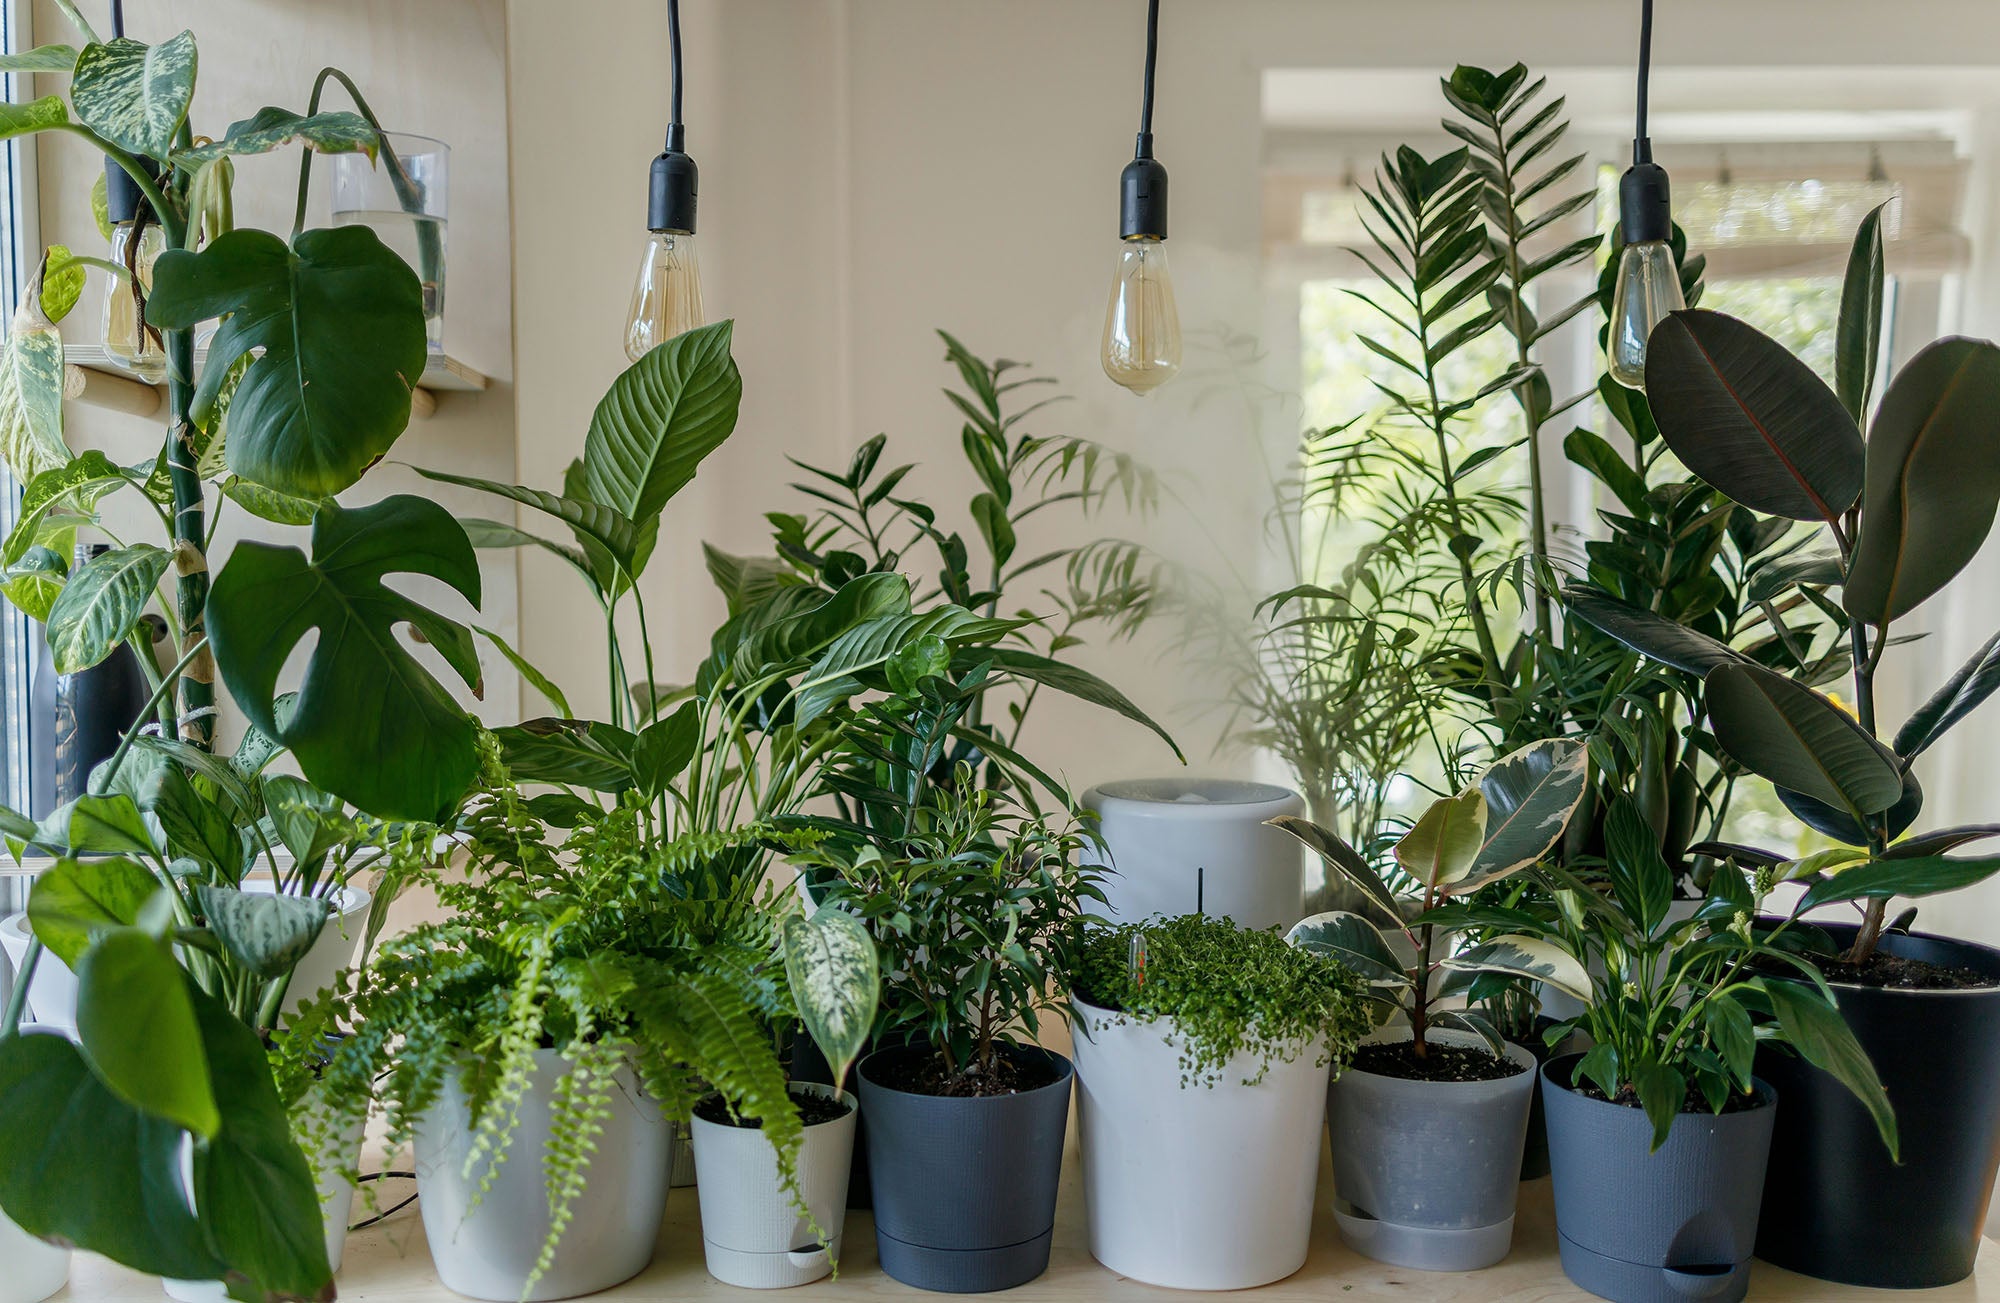 Bringing the Outdoors In: How to Create a Lush Indoor Garden with Houseplants